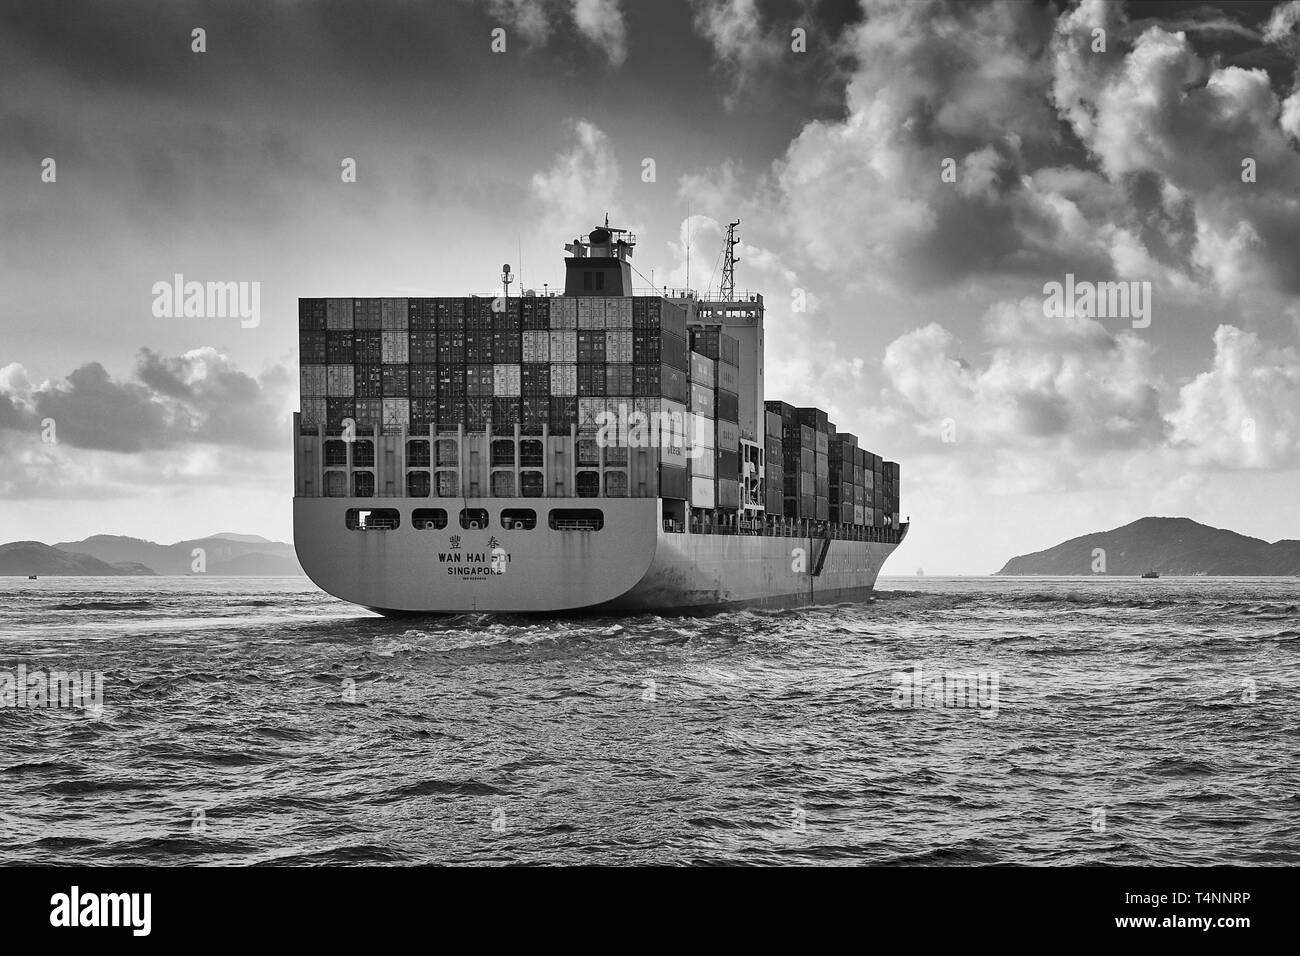 Moody Black and White Photo Of A WAN HAI LINES Container Ship, WAN HAI 501, Entering The East Lamma Channel As She Leaves Victoria Harbour, Hong Kong Stock Photo